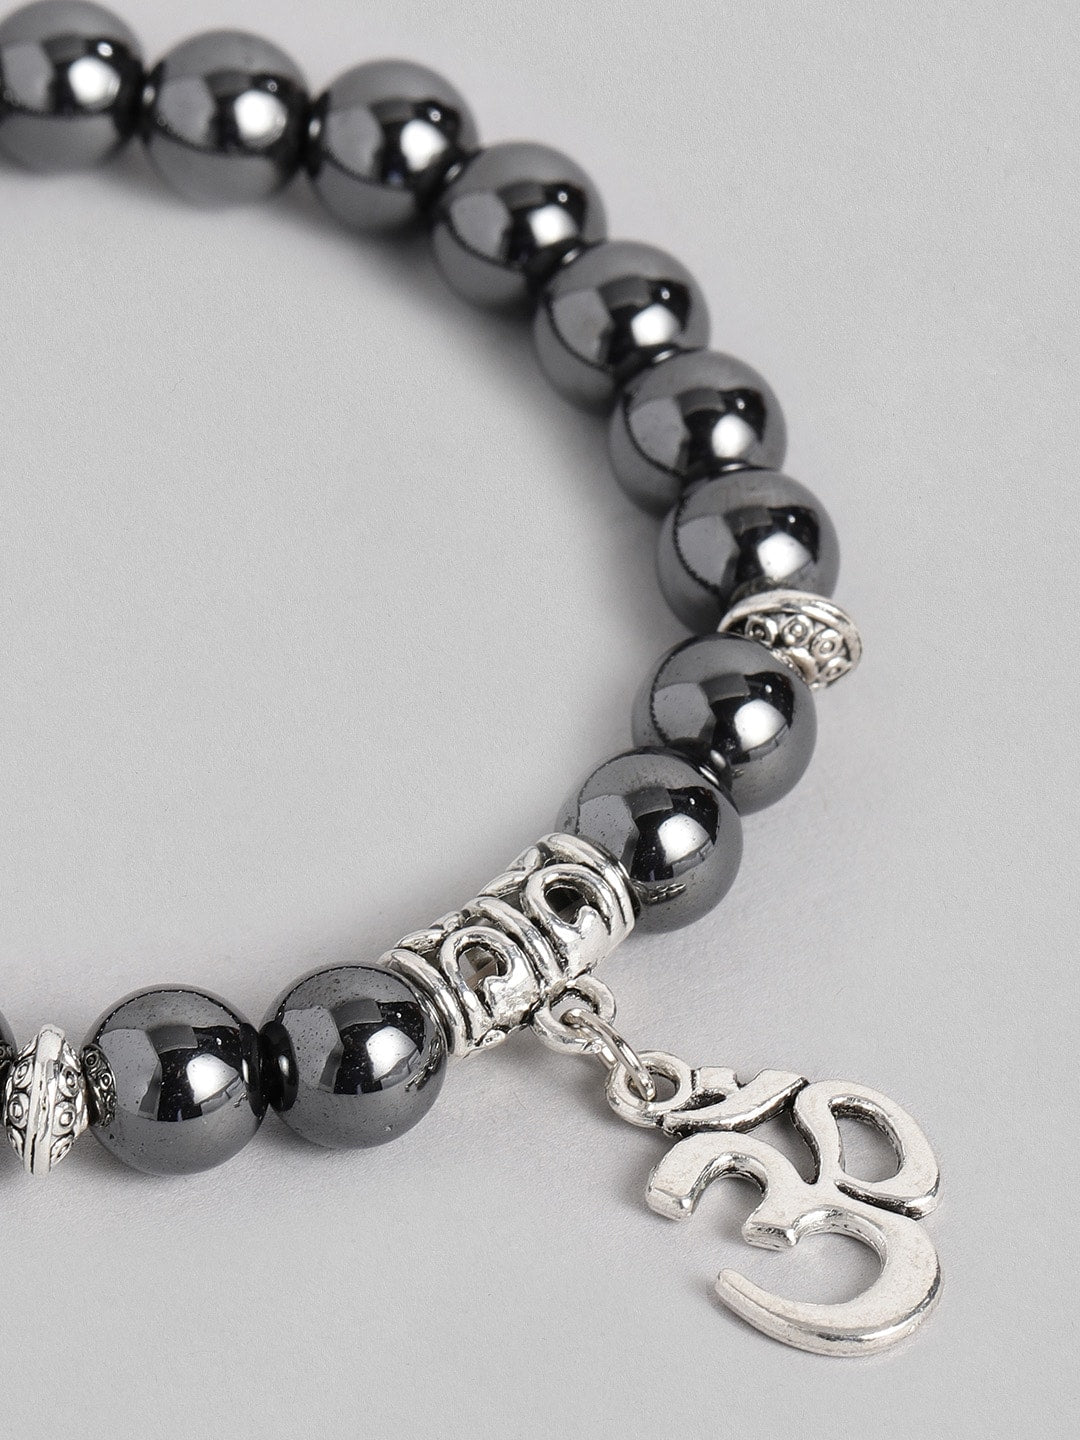 EL REGALO Men Charcoal Grey & Silver-Toned Handcrafted Om Elasticated Charm Bracelet - for Men
Style ID: 16186566